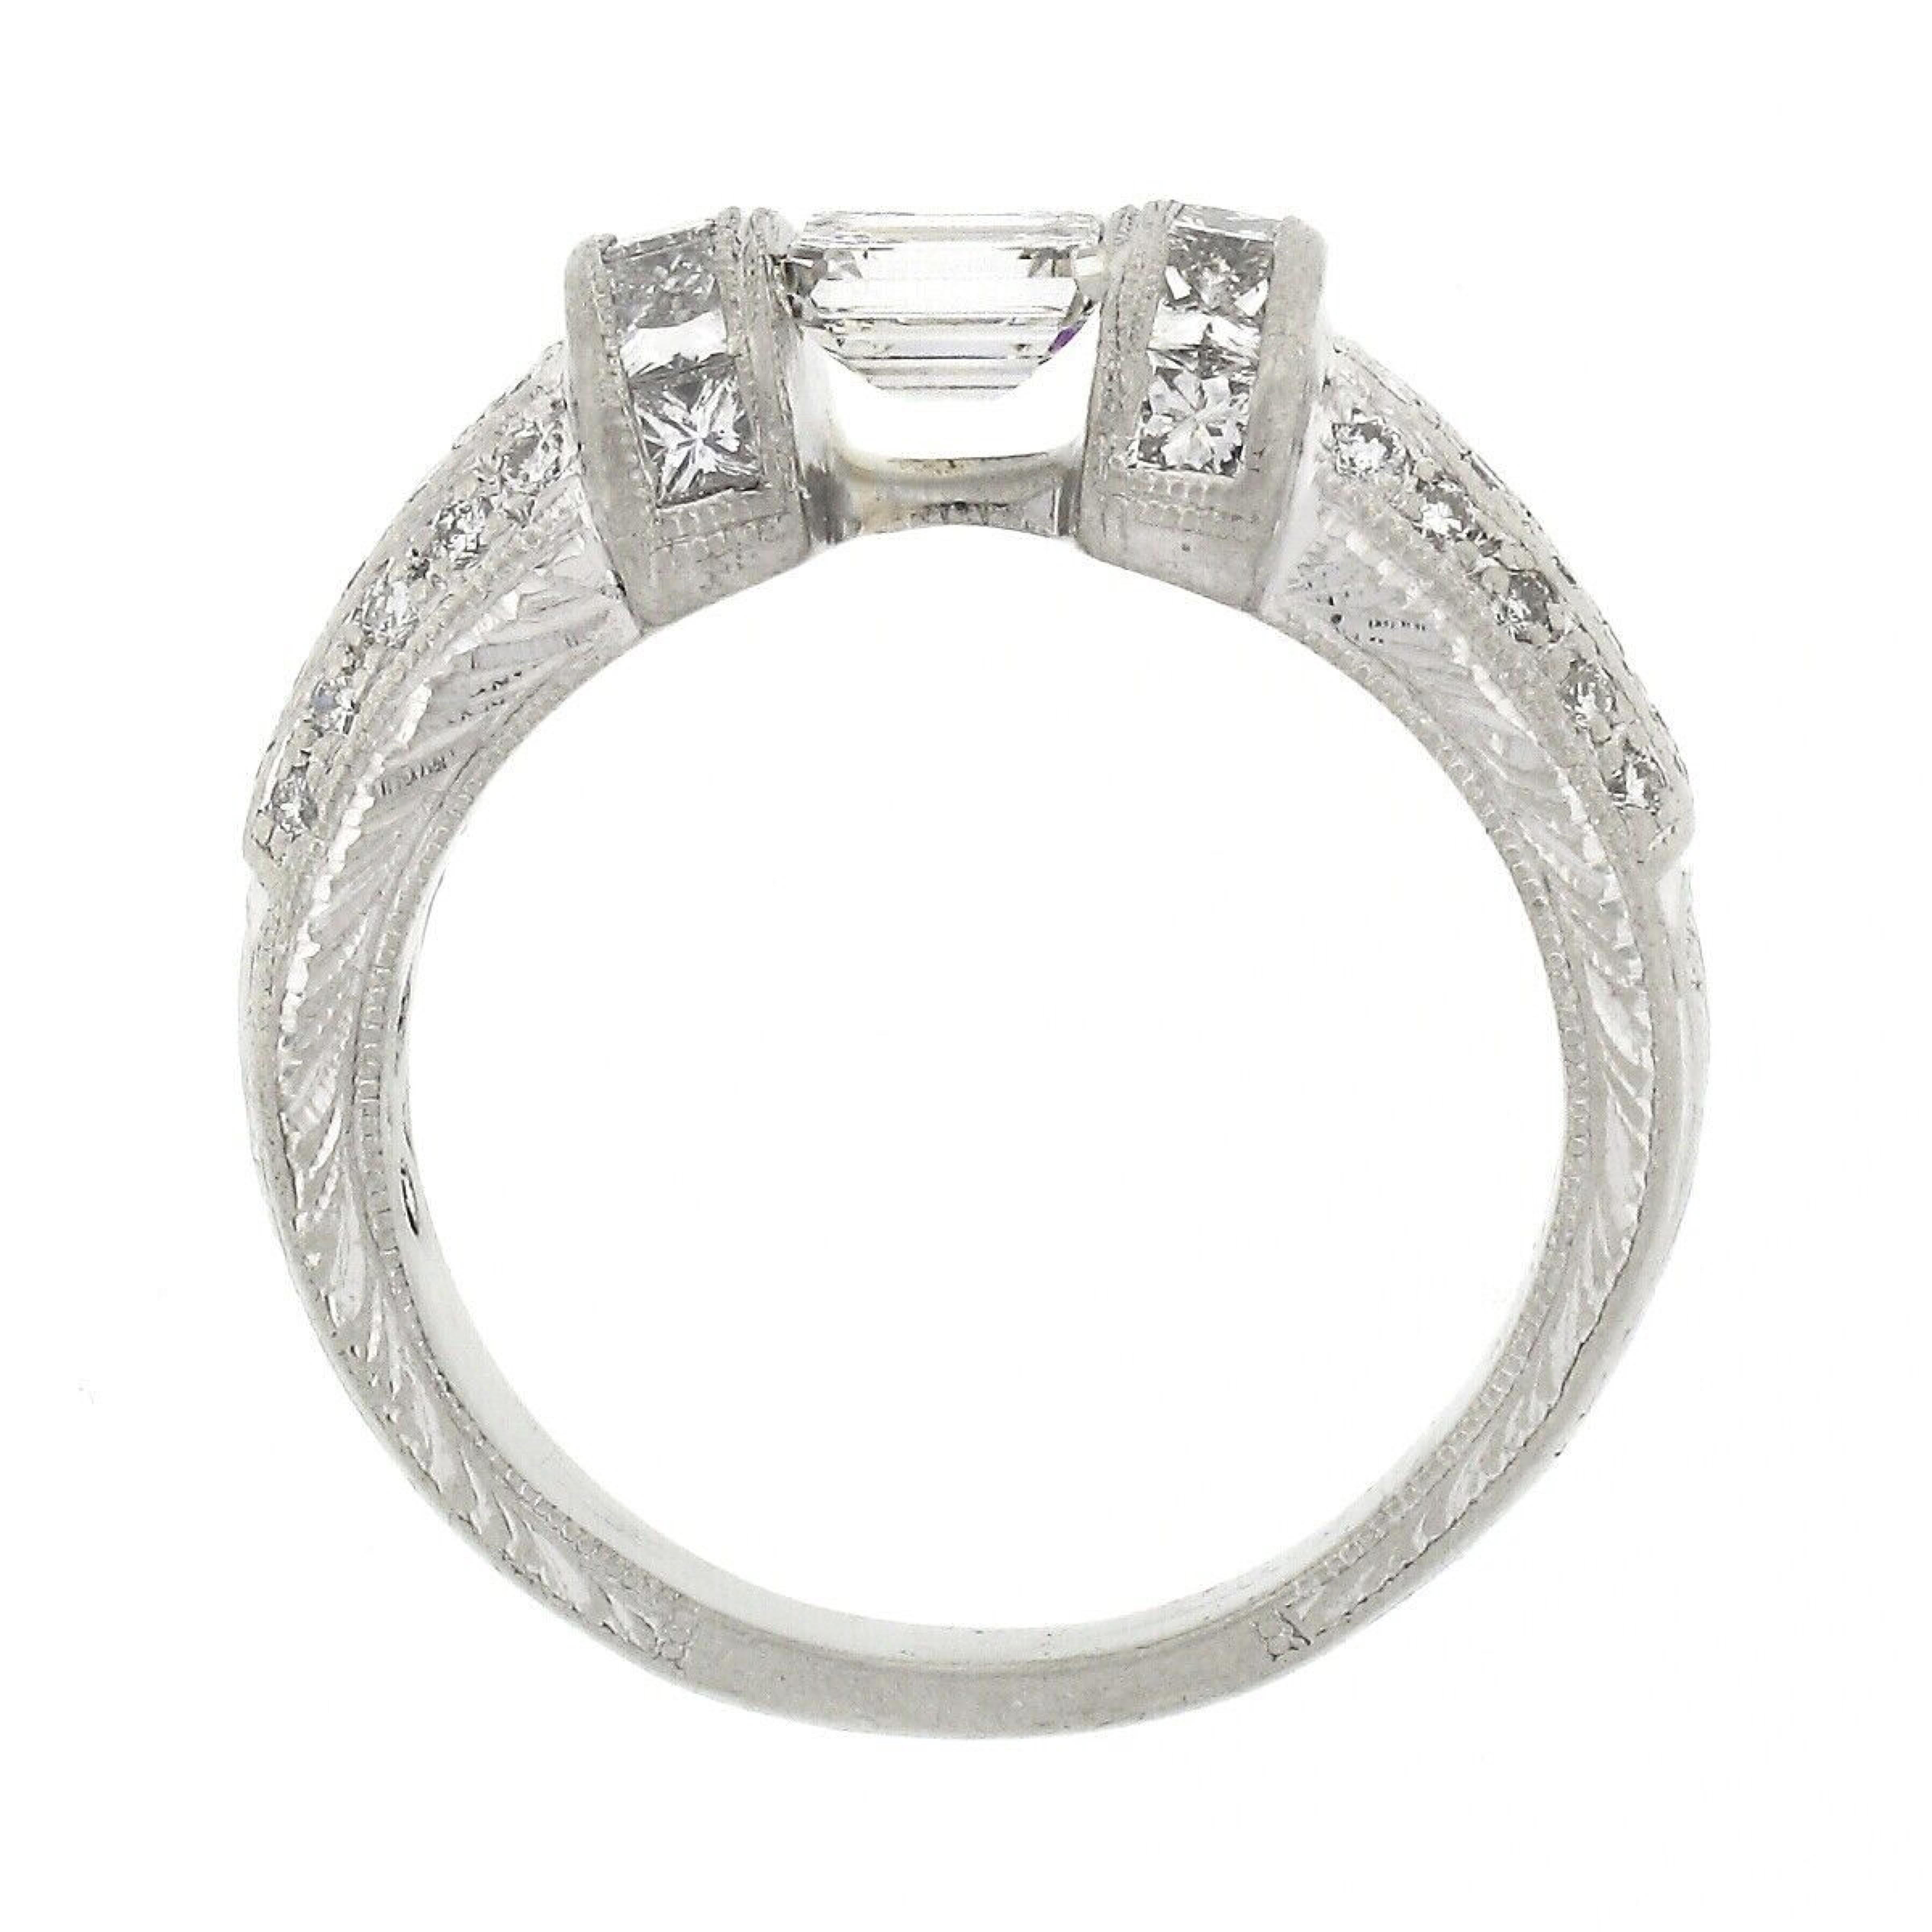 Vintage Platinum 1.35ct Floating Diamond W/ Accents Hand Engraved Work Band Ring For Sale 3